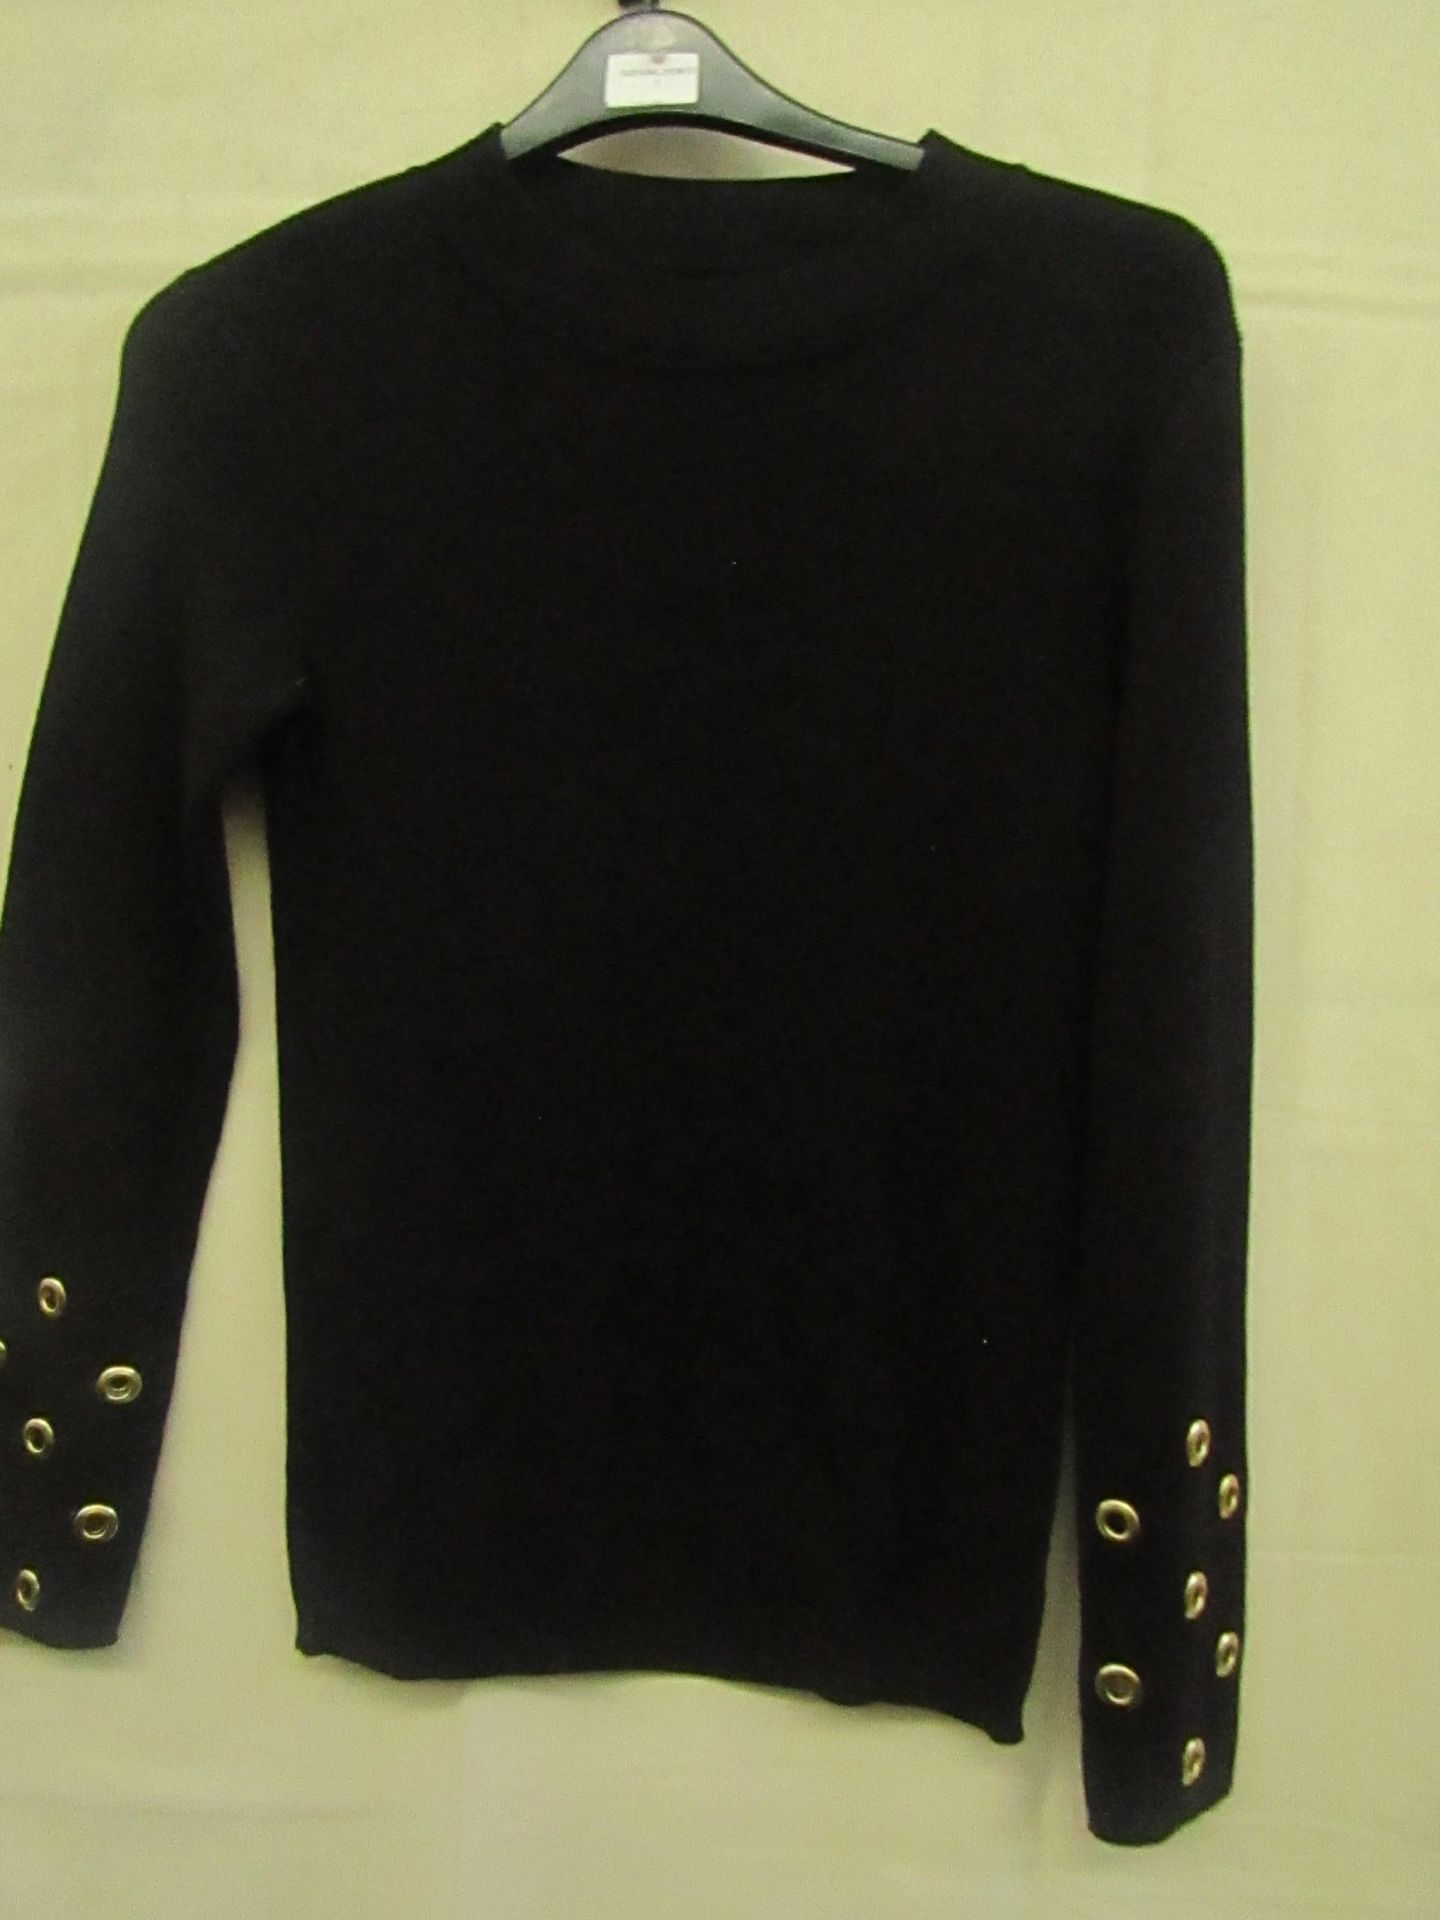 Unbranded - Navy Marl Long-Sleeved Jumper - Size Unknown - No Packaging.